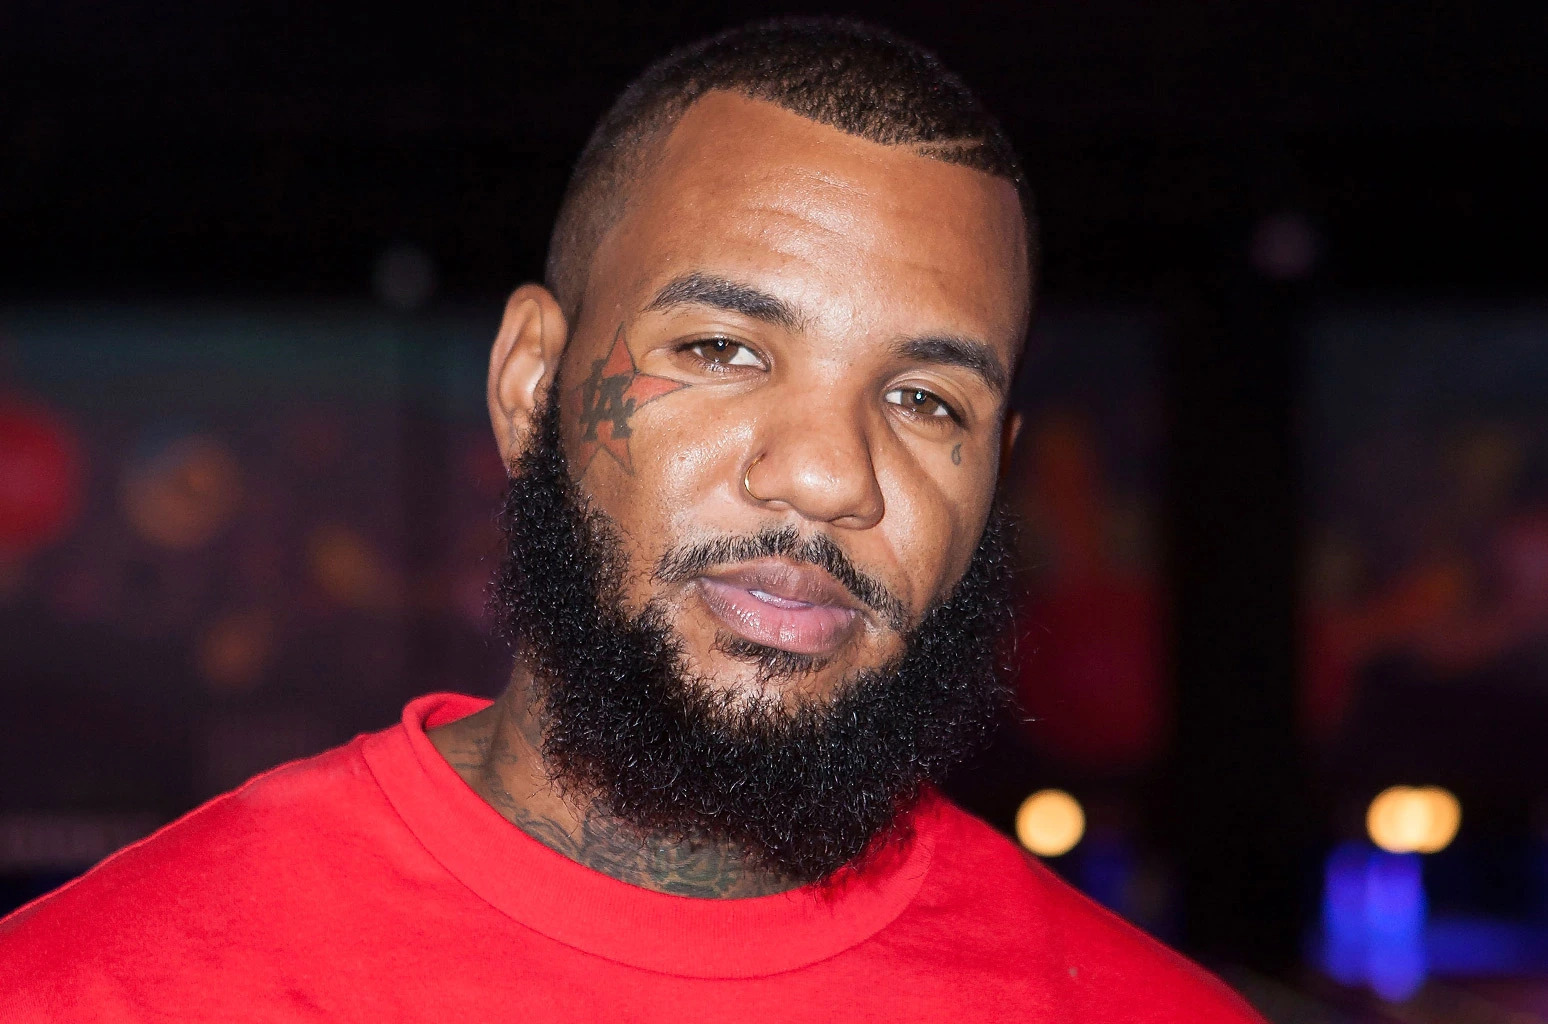 The Game Demands A 10-Day Nba Contract While Showcasing Basketball Prowess